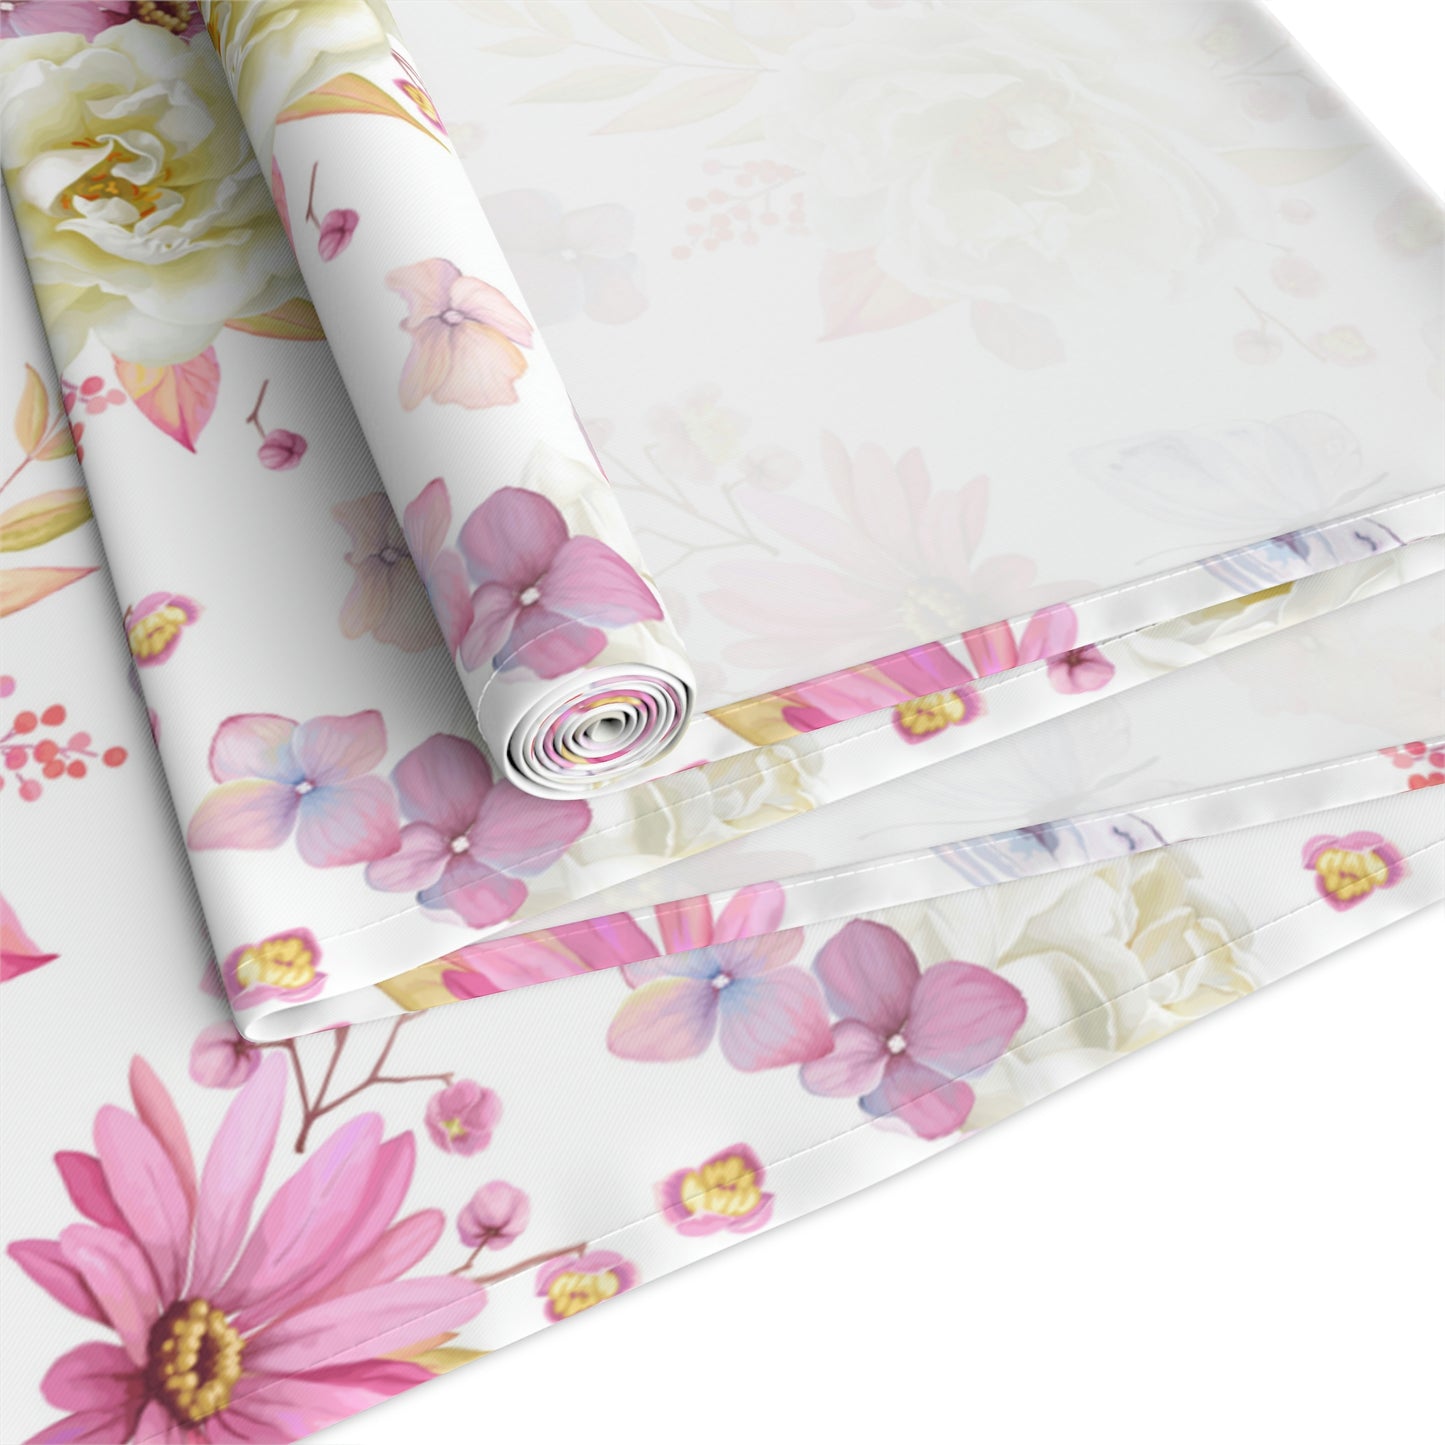 Spring Butterflies and Roses Table Runner (Cotton, Poly)